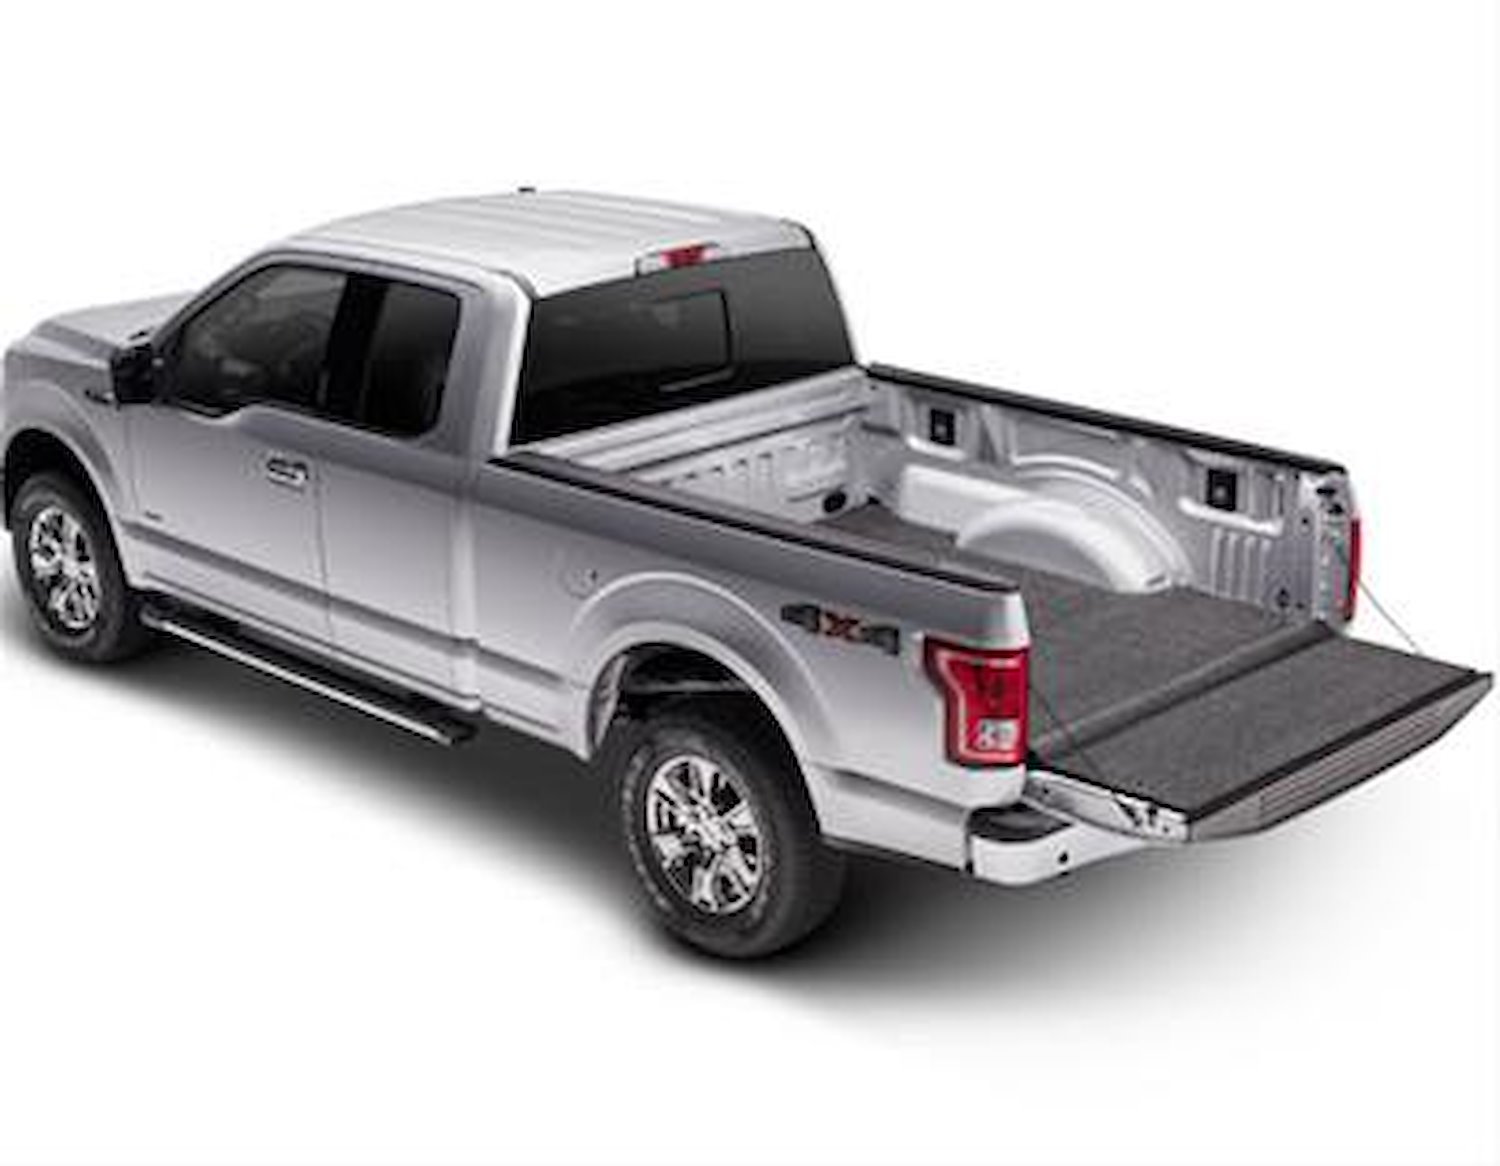 XLTBMQ15SBS XLT BEDMAT FOR SPRAY-IN OR NO BED LINER 15+ FORD F-150 6'7" BED